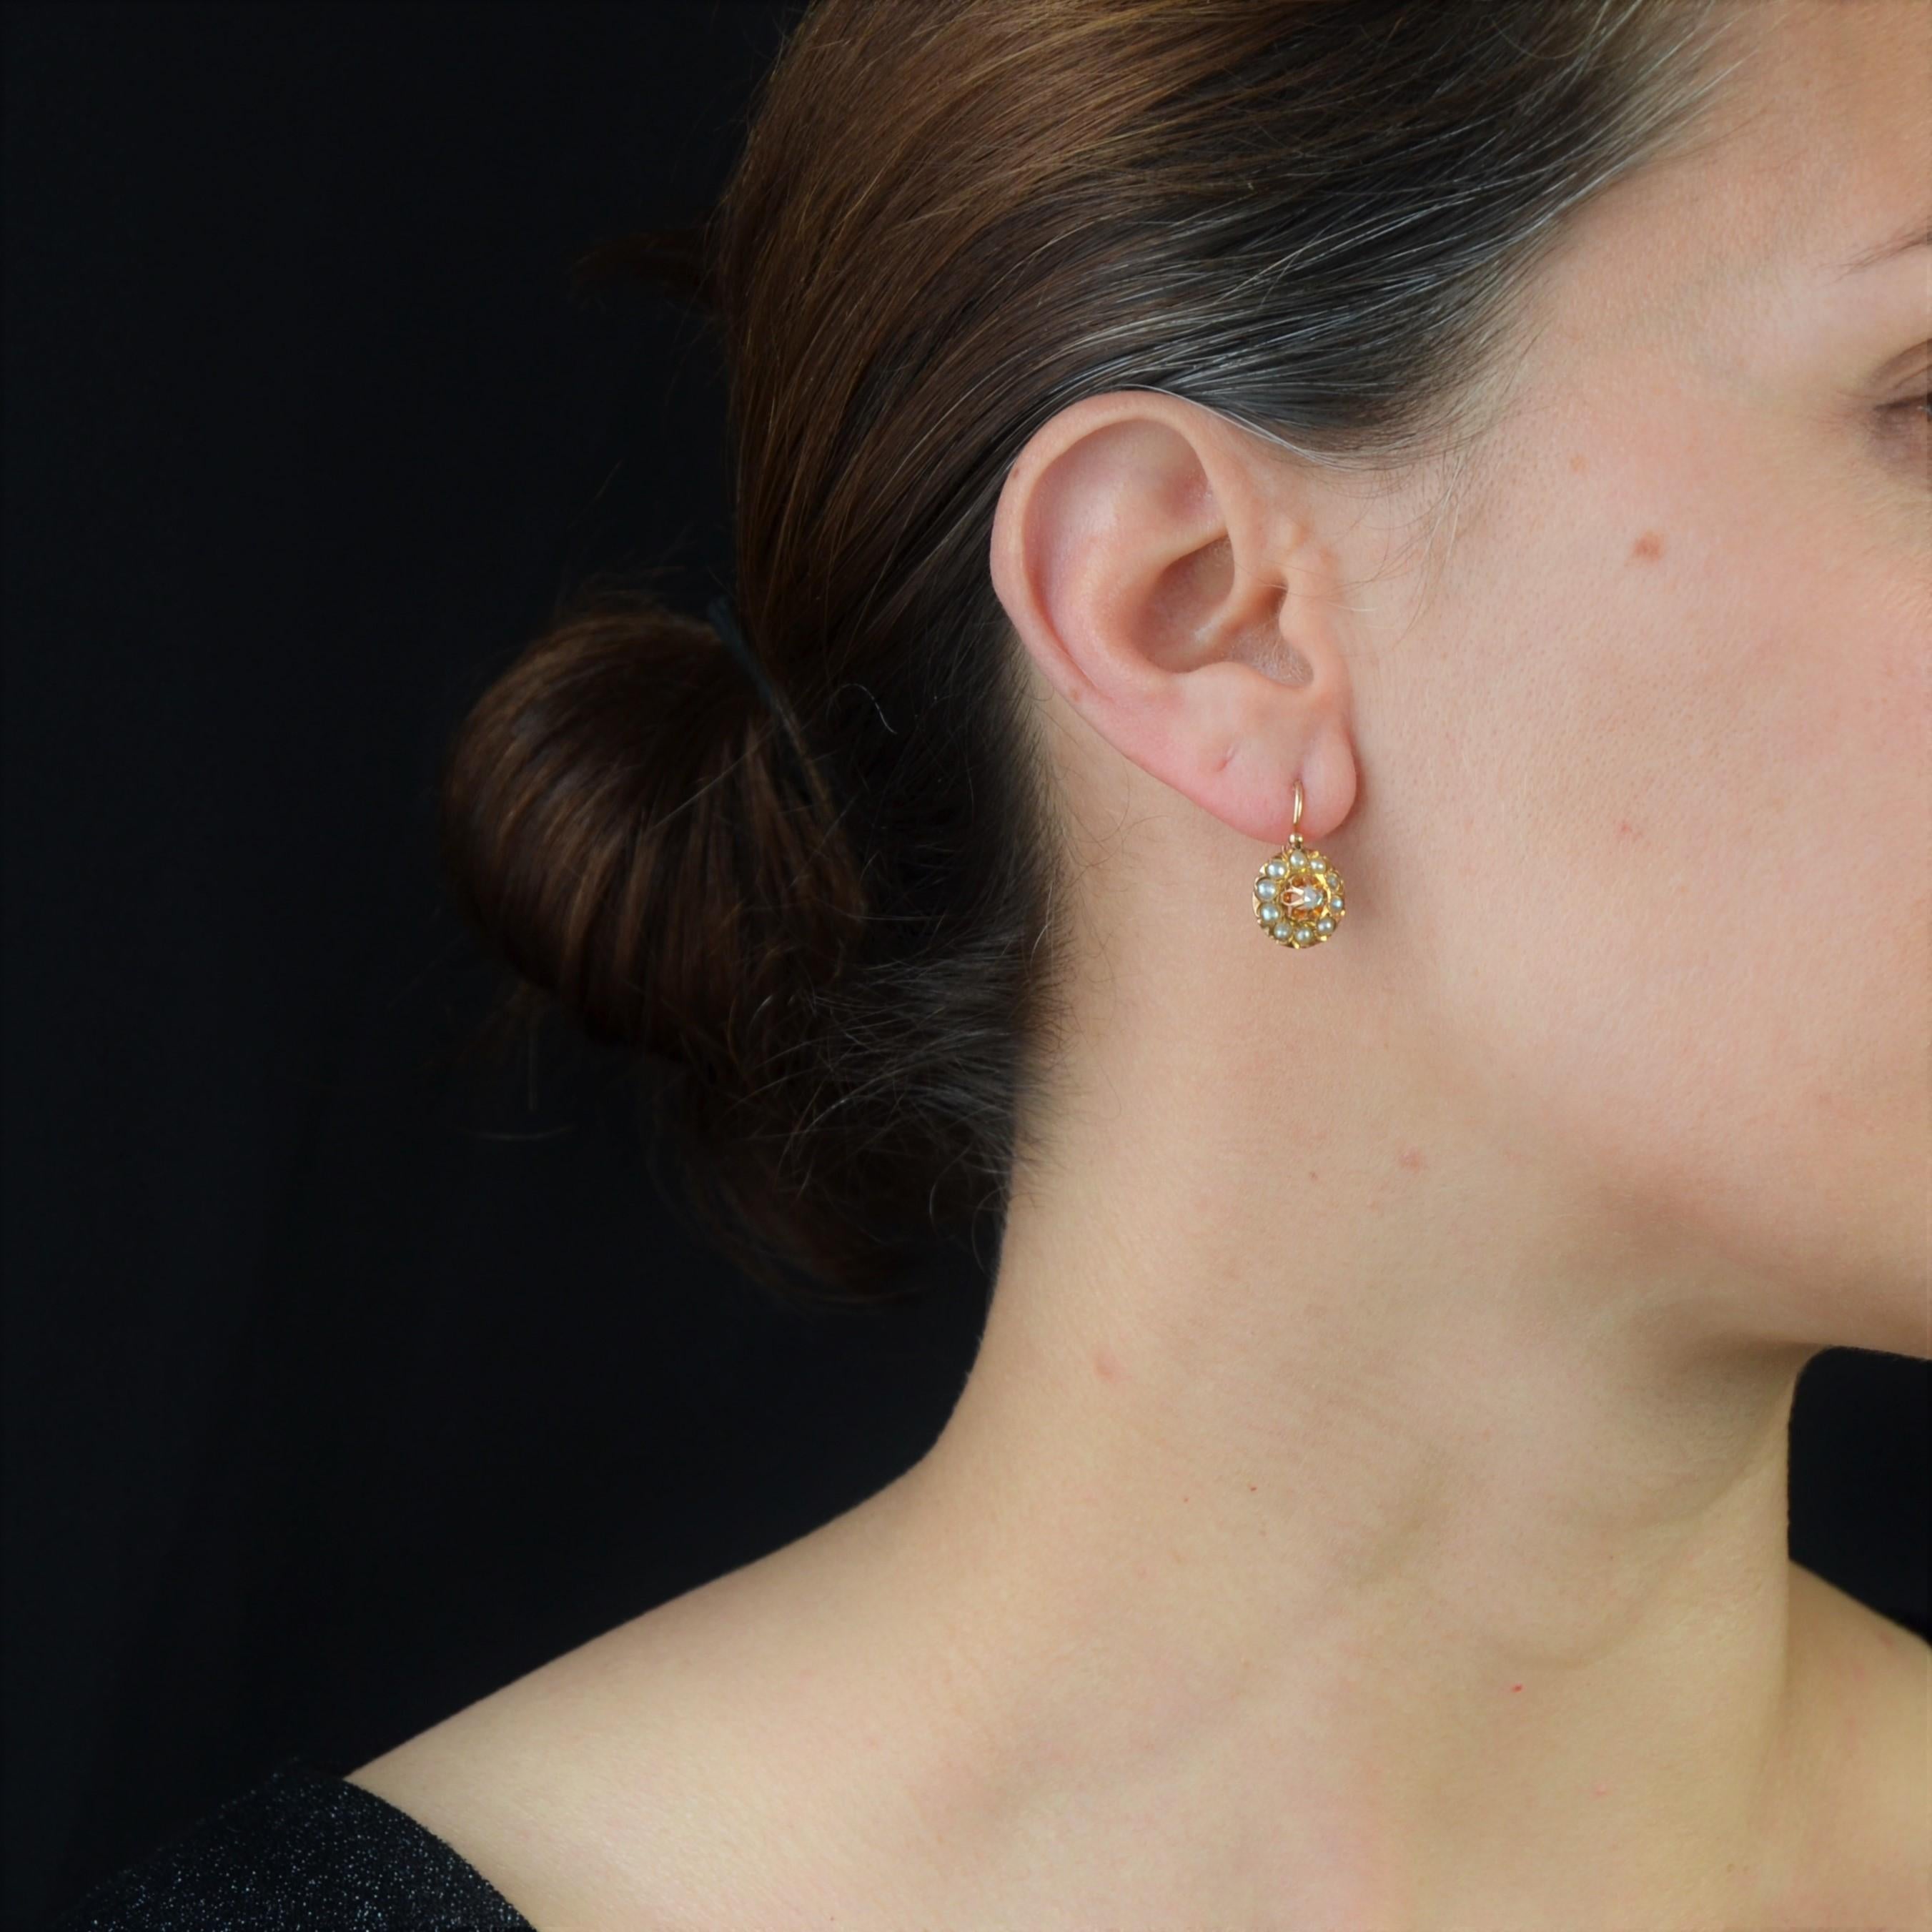 For pierced ears.
Earring in 18 karat rose gold, horse head hallmark.
Called lever- back earrings, because they could be worn at night, these antique earrings are flower-shaped, the heart being decorated with a rose-cut diamond, and the petals